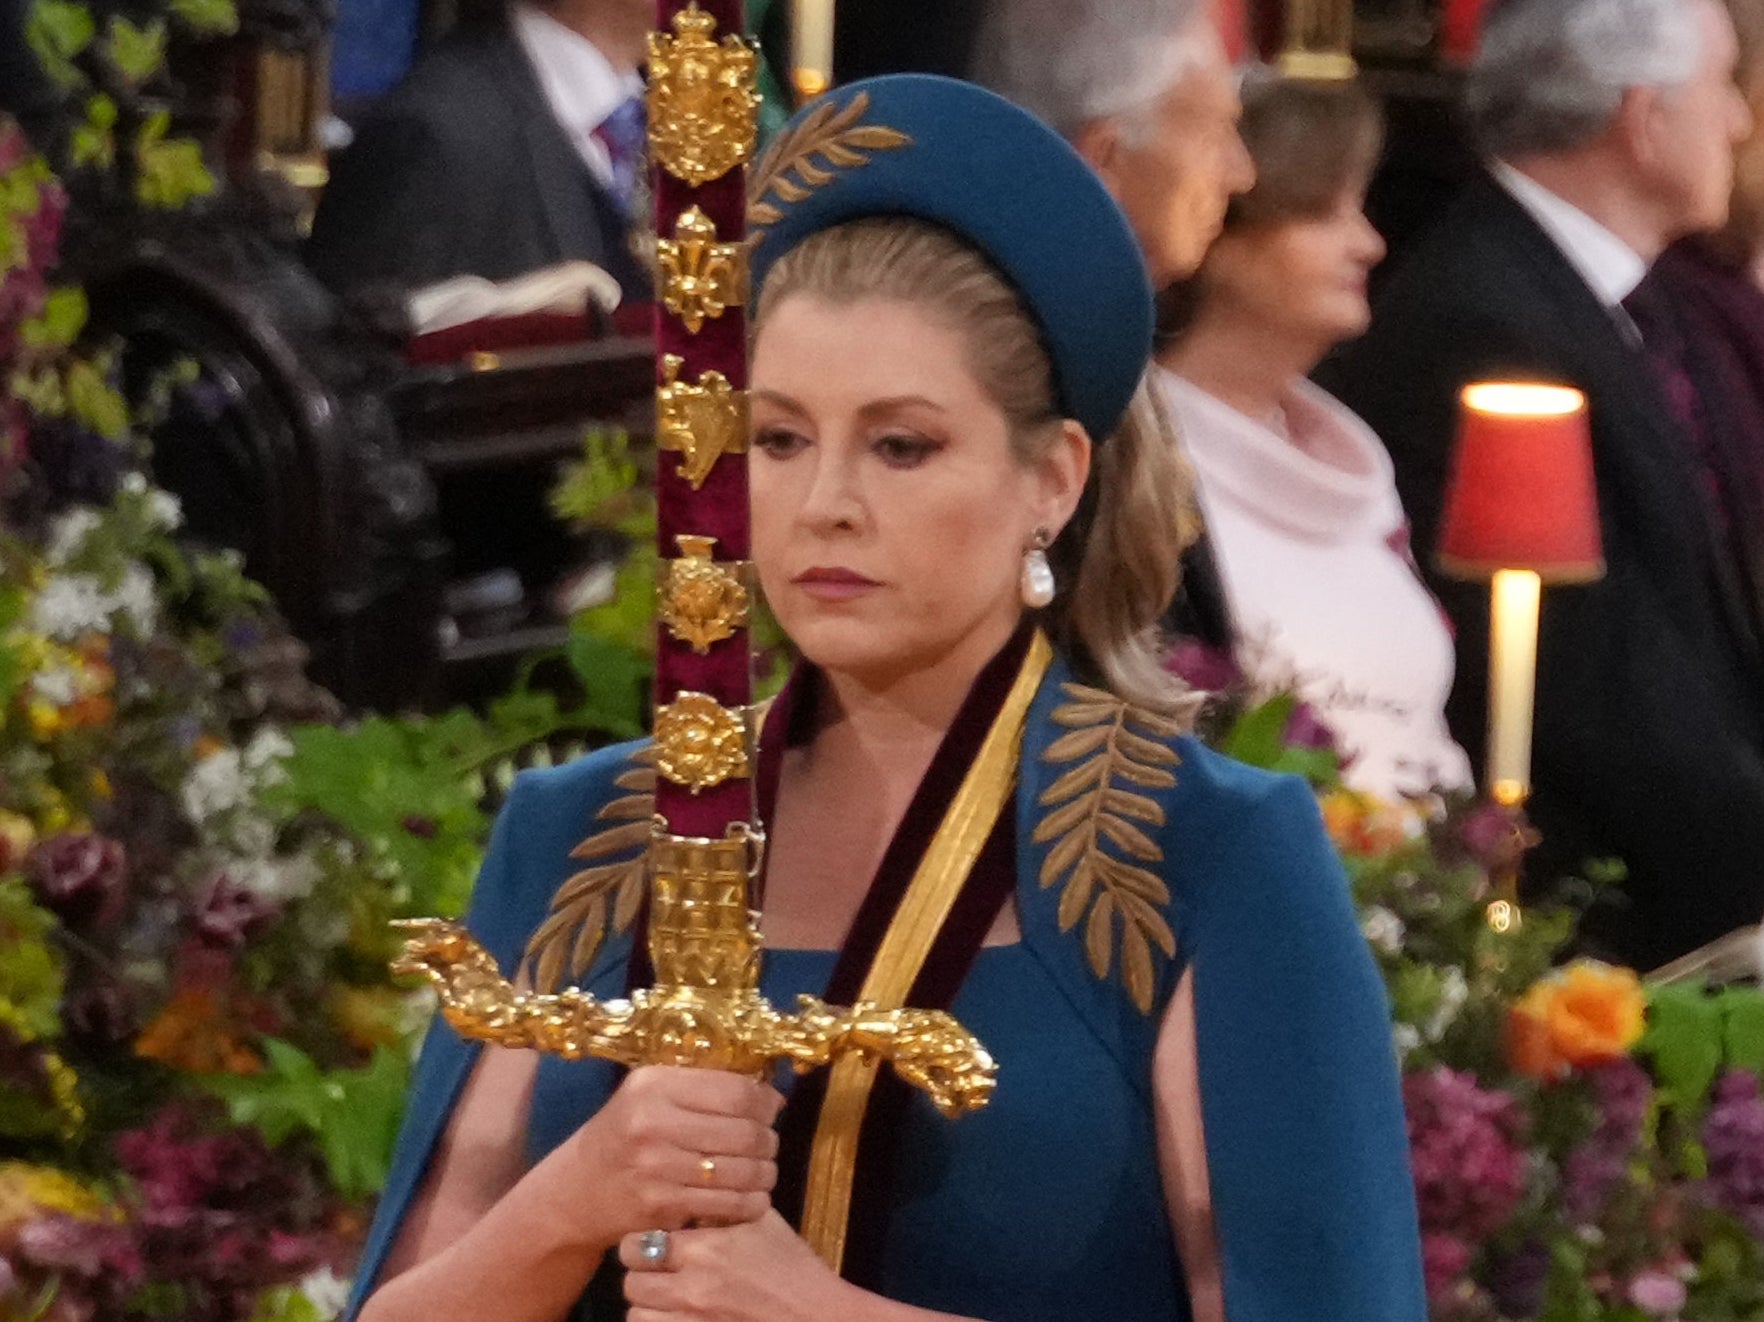 Penny Mordaunt, carrying the Sword of State in procession through Westminster Abbey for the coronation of King Charles